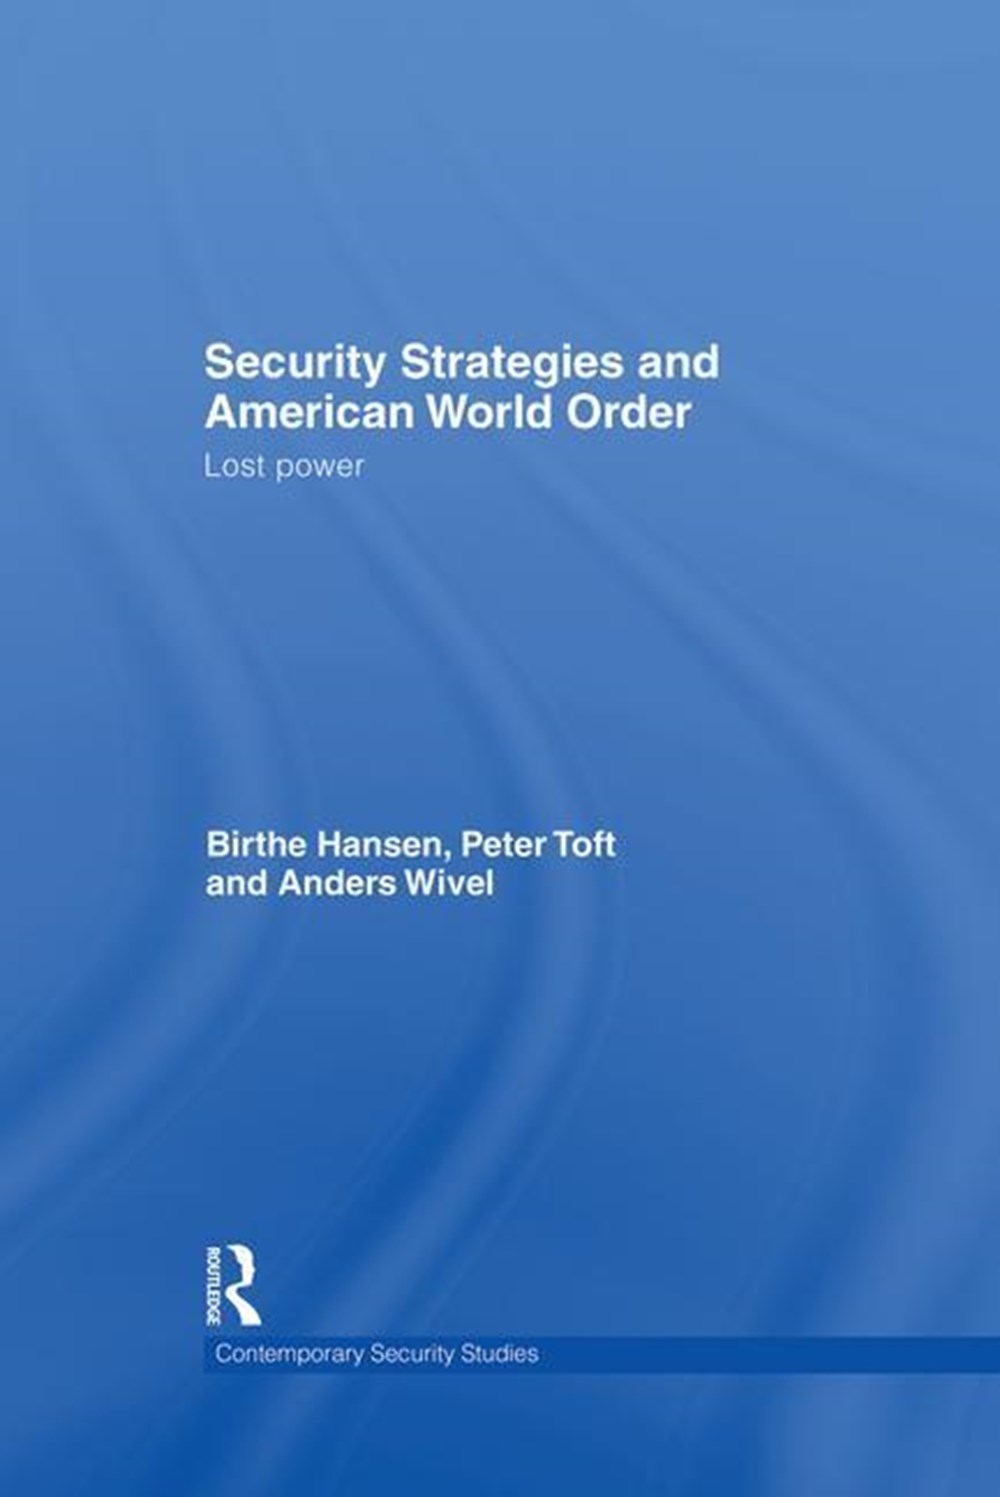 Security Strategies and American World Order: Lost Power